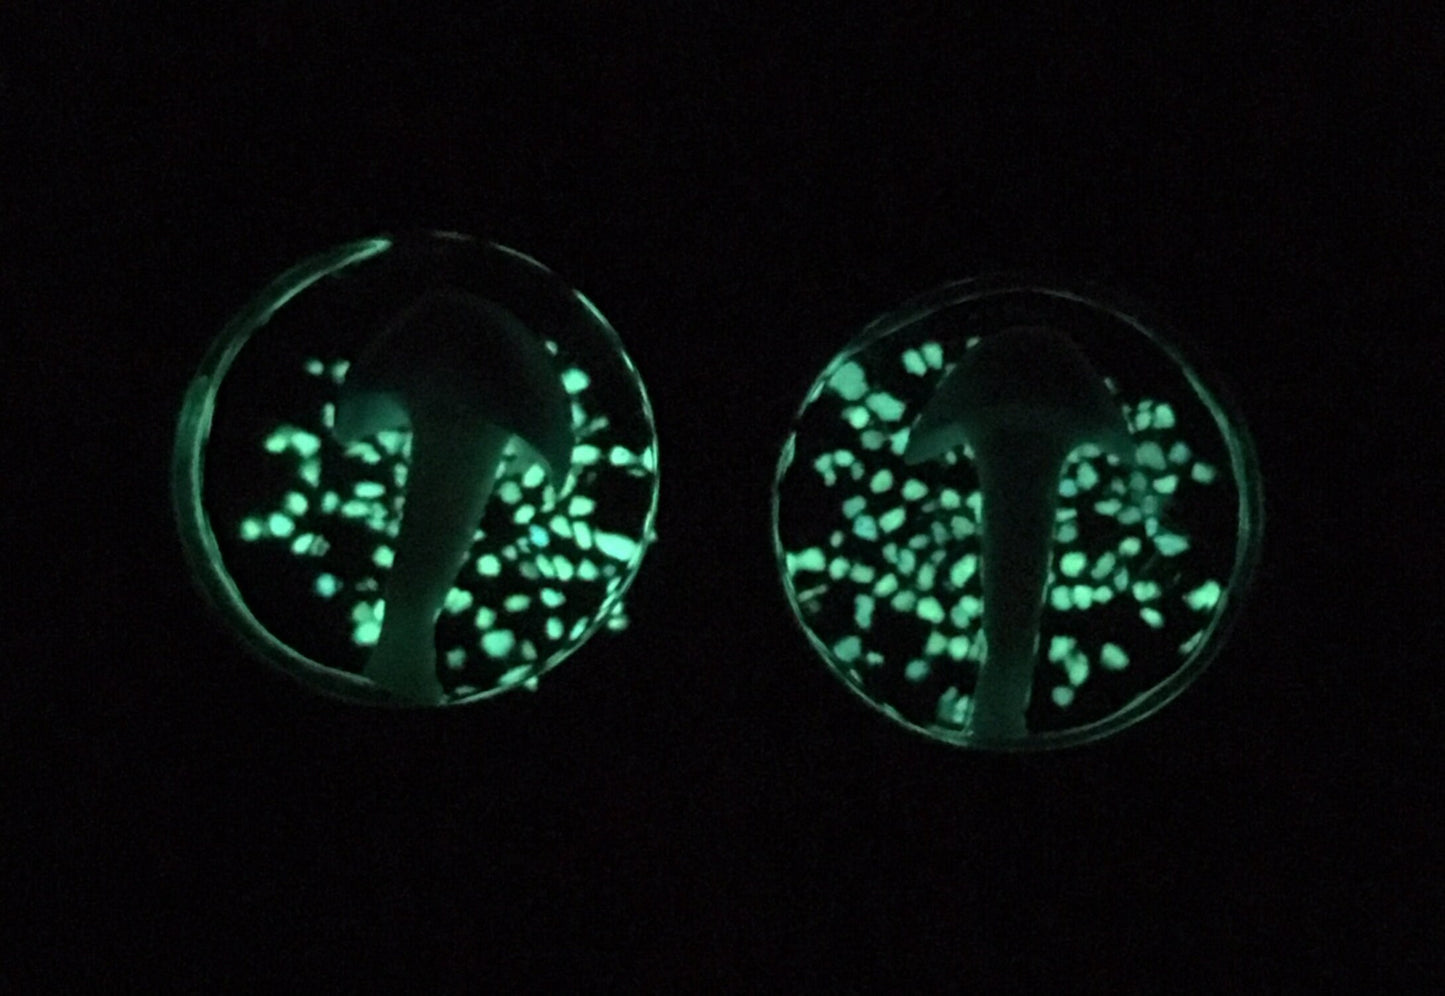 PAIR of Glow in the Dark Floating Mushroom Pyrex Glass Double Flare Plugs - Gauges 2g (6mm) through 5/8" (16mm) available!